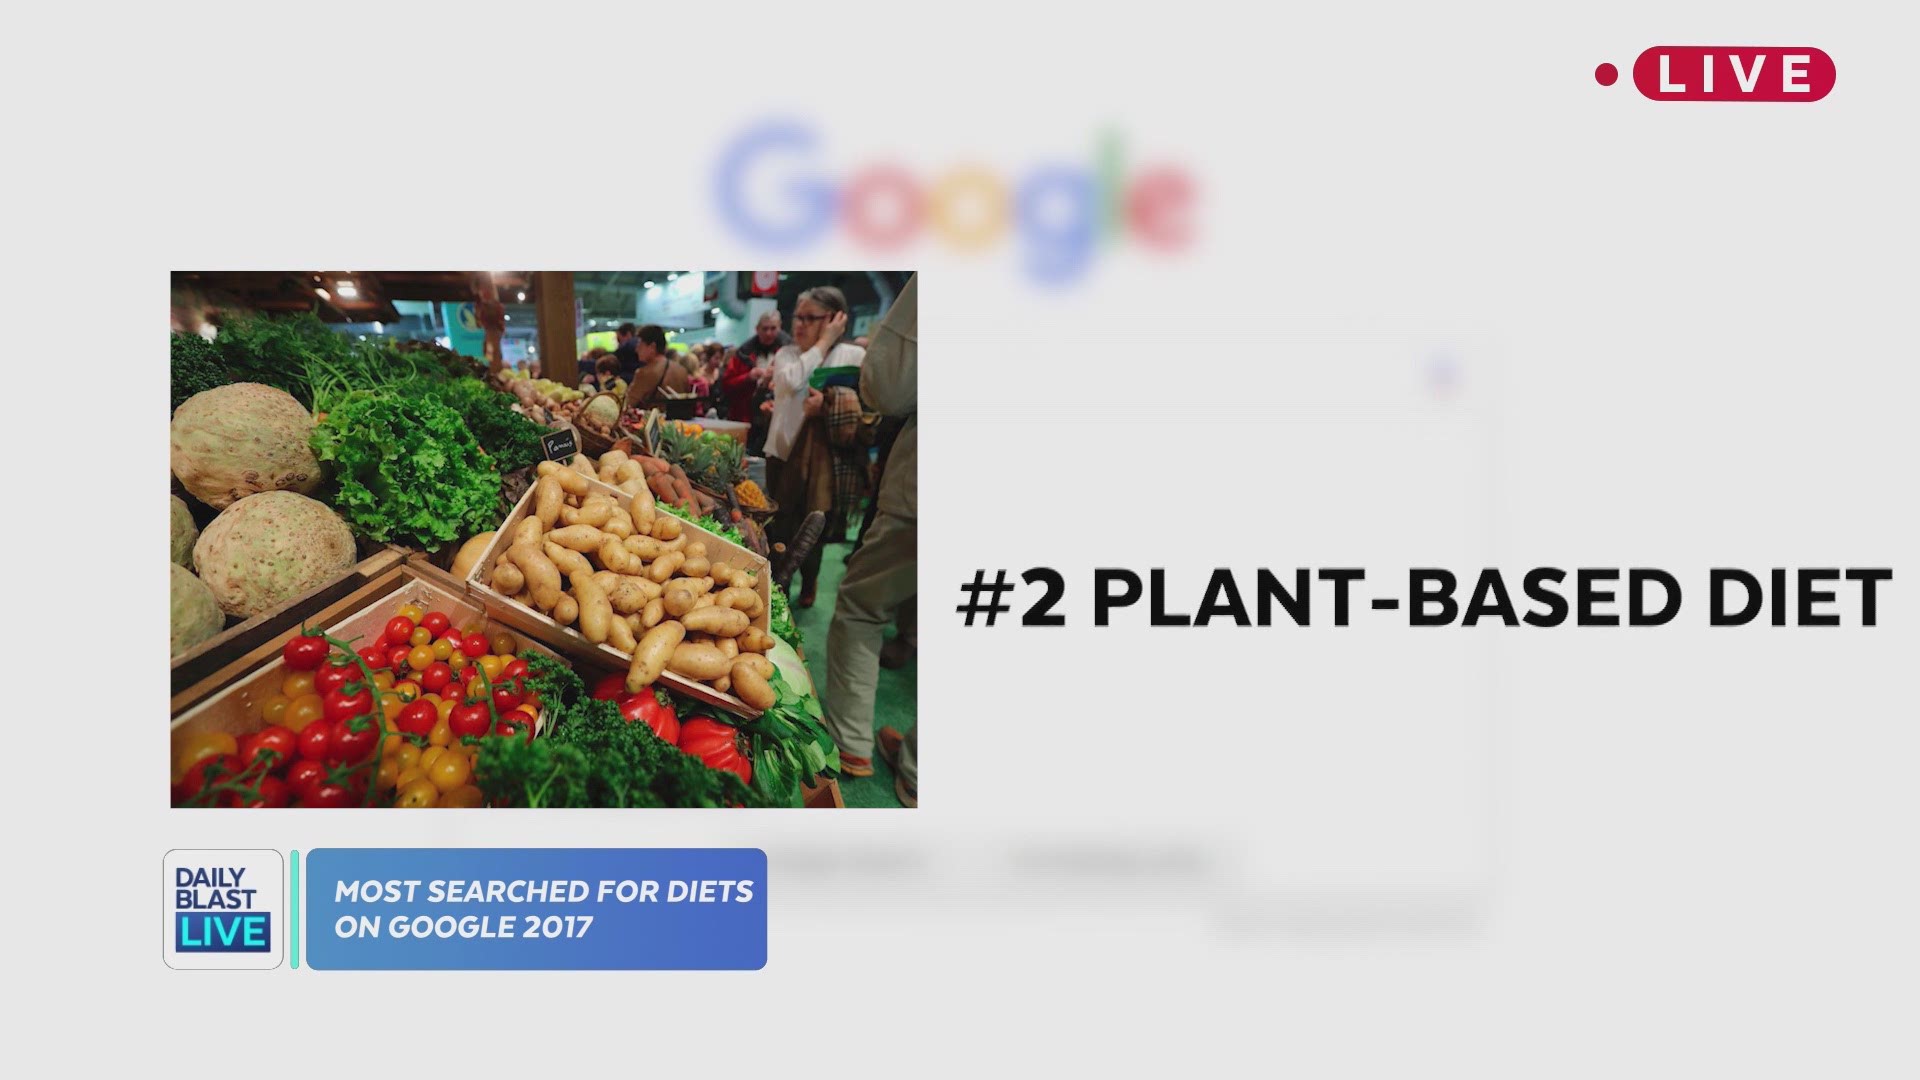 Google shared the top 10 diets people looked for in 2017, introducing us to fads we didn't even know existed. Watch to see some of the top trending diets of the year.